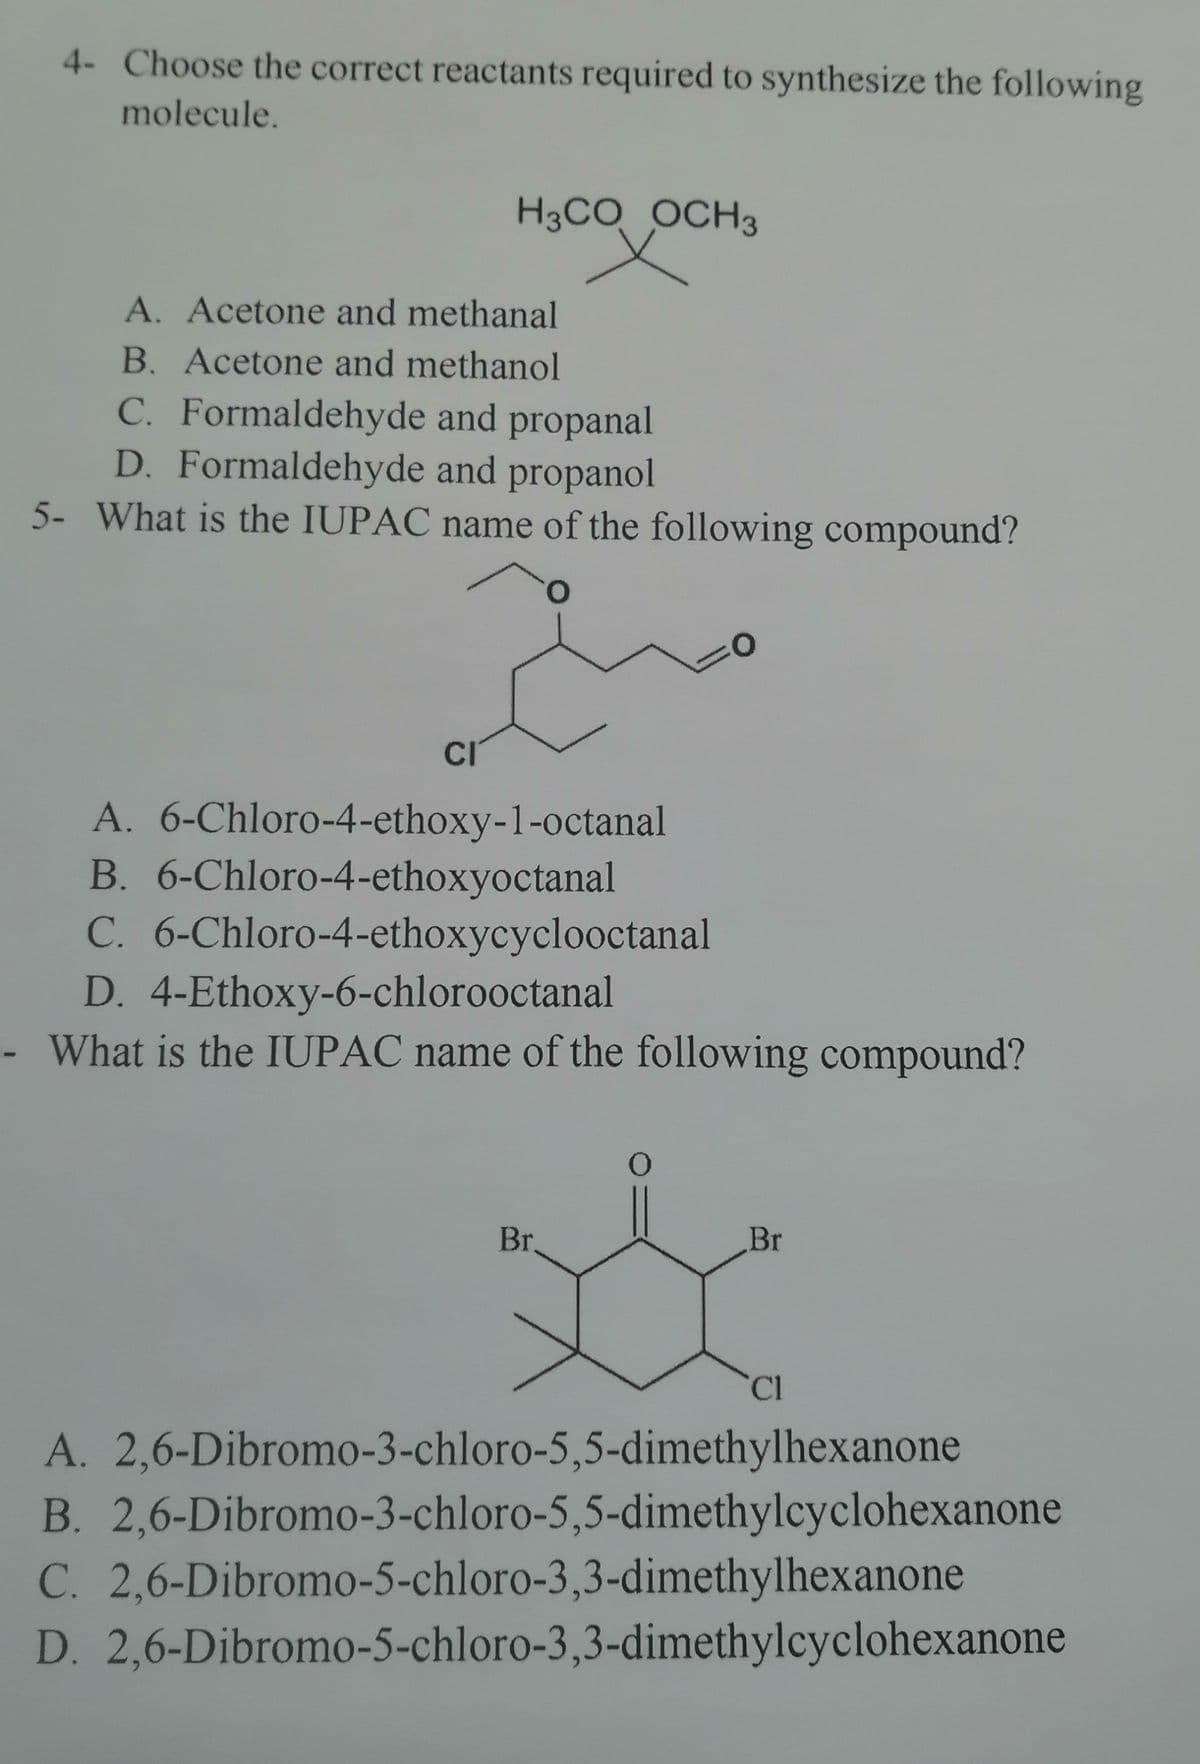 4- Choose the correct reactants required to synthesize the following
molecule.
H3CO OCH 3
A. Acetone and methanal
B. Acetone and methanol
C. Formaldehyde and propanal
D. Formaldehyde and propanol
5- What is the IUPAC name of the following compound?
CI
A. 6-Chloro-4-ethoxy-1-octanal
B. 6-Chloro-4-ethoxyoctanal
C. 6-Chloro-4-ethoxycyclooctanal
D. 4-Ethoxy-6-chlorooctanal
- What is the IUPAC name of the following compound?
0
Br.
Br
Cl
A. 2,6-Dibromo-3-chloro-5,5-dimethylhexanone
B. 2,6-Dibromo-3-chloro-5,5-dimethylcyclohexanone
C. 2,6-Dibromo-5-chloro-3,3-dimethylhexanone
D. 2,6-Dibromo-5-chloro-3,3-dimethylcyclohexanone